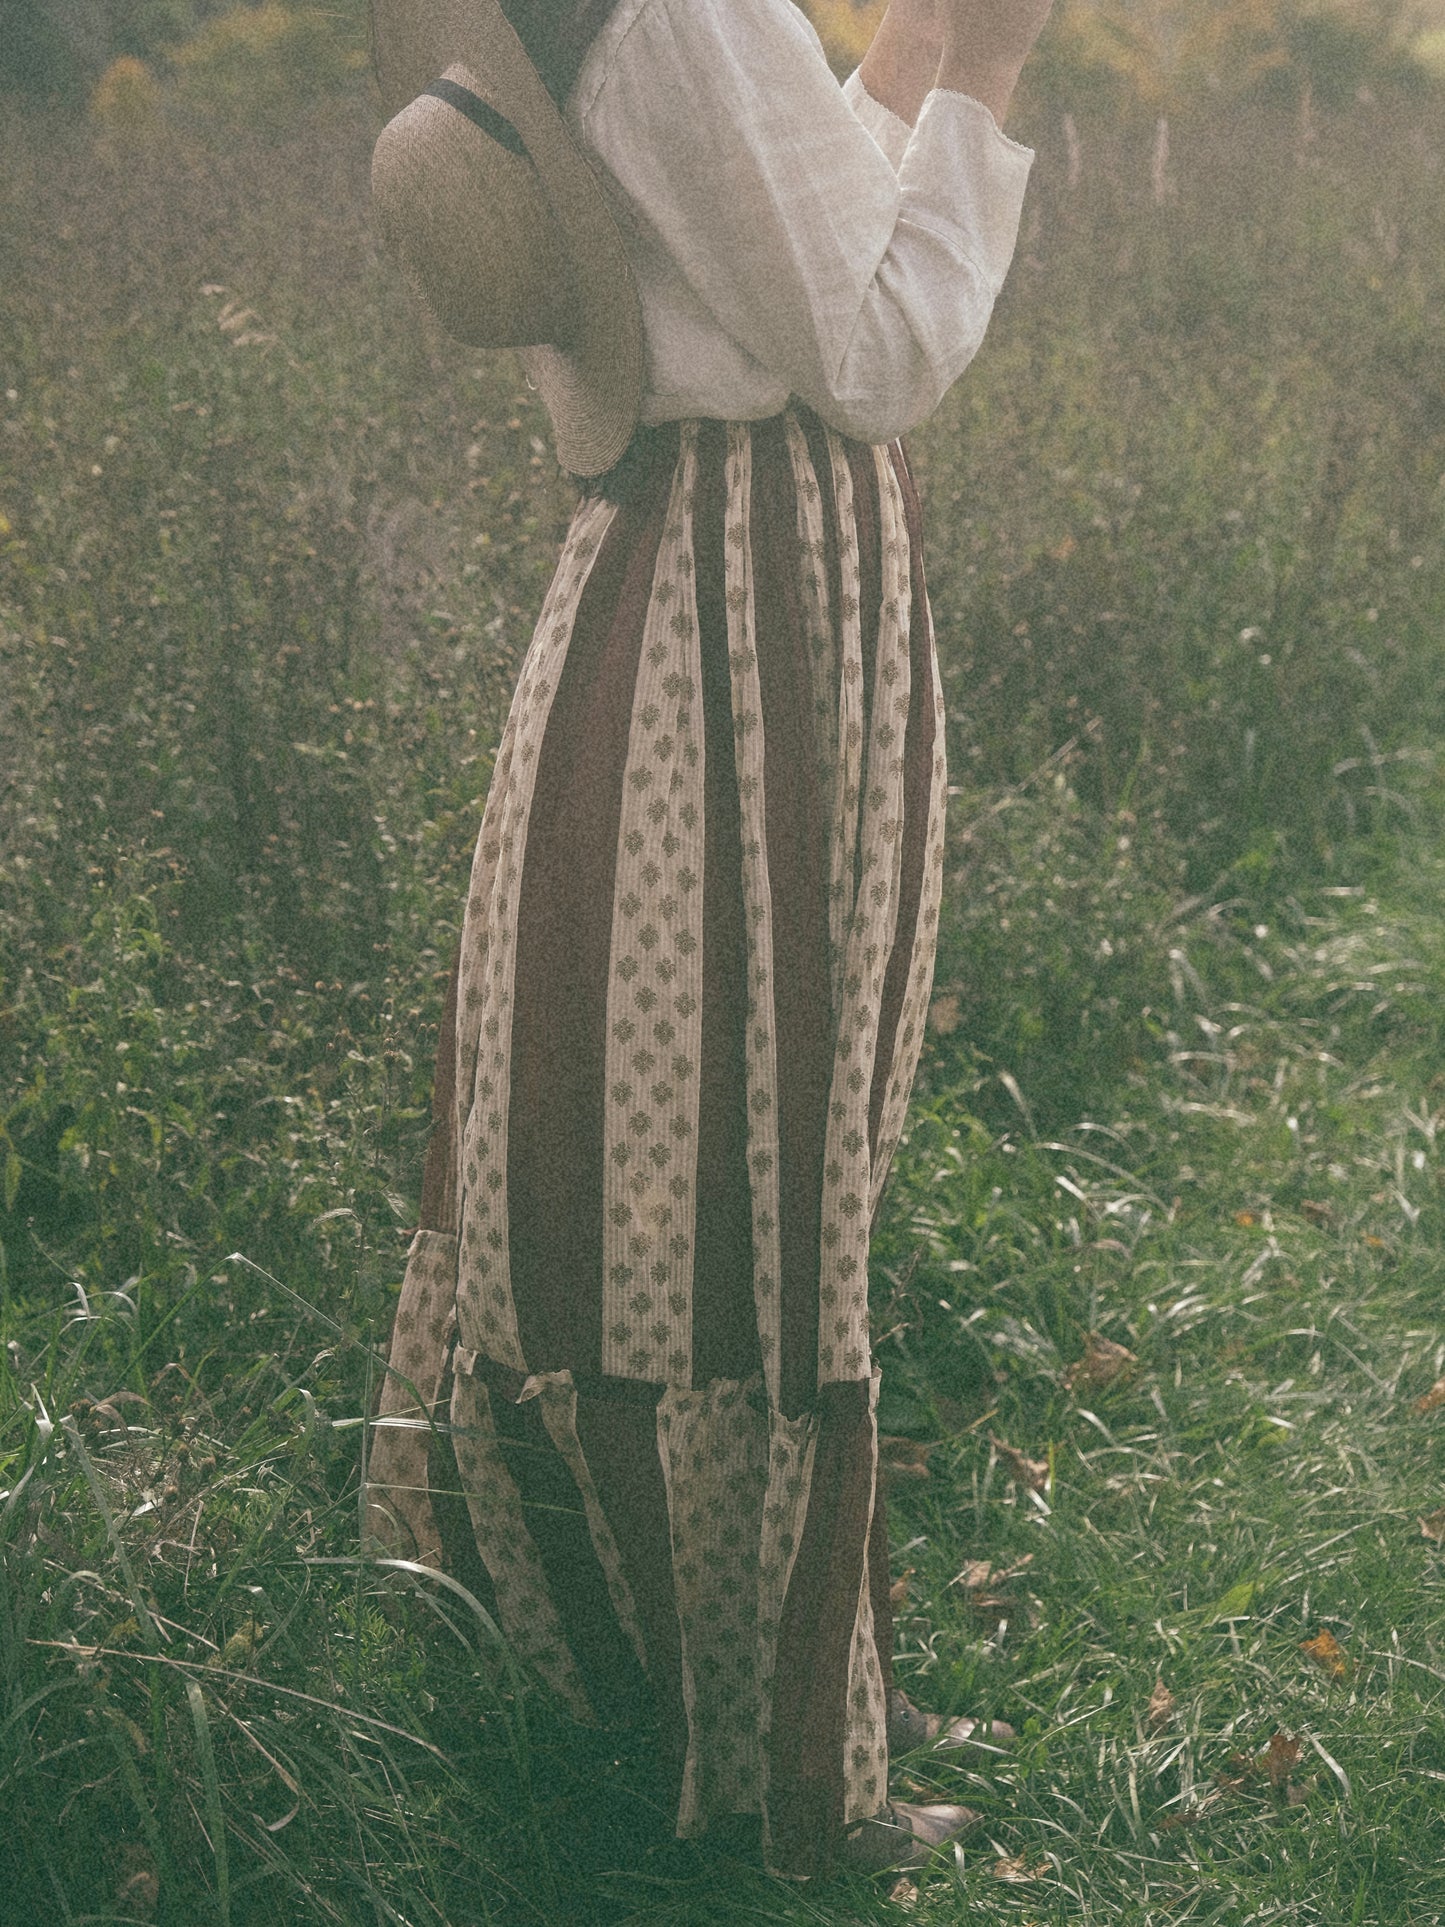 Reworked Antique Calico Skirt